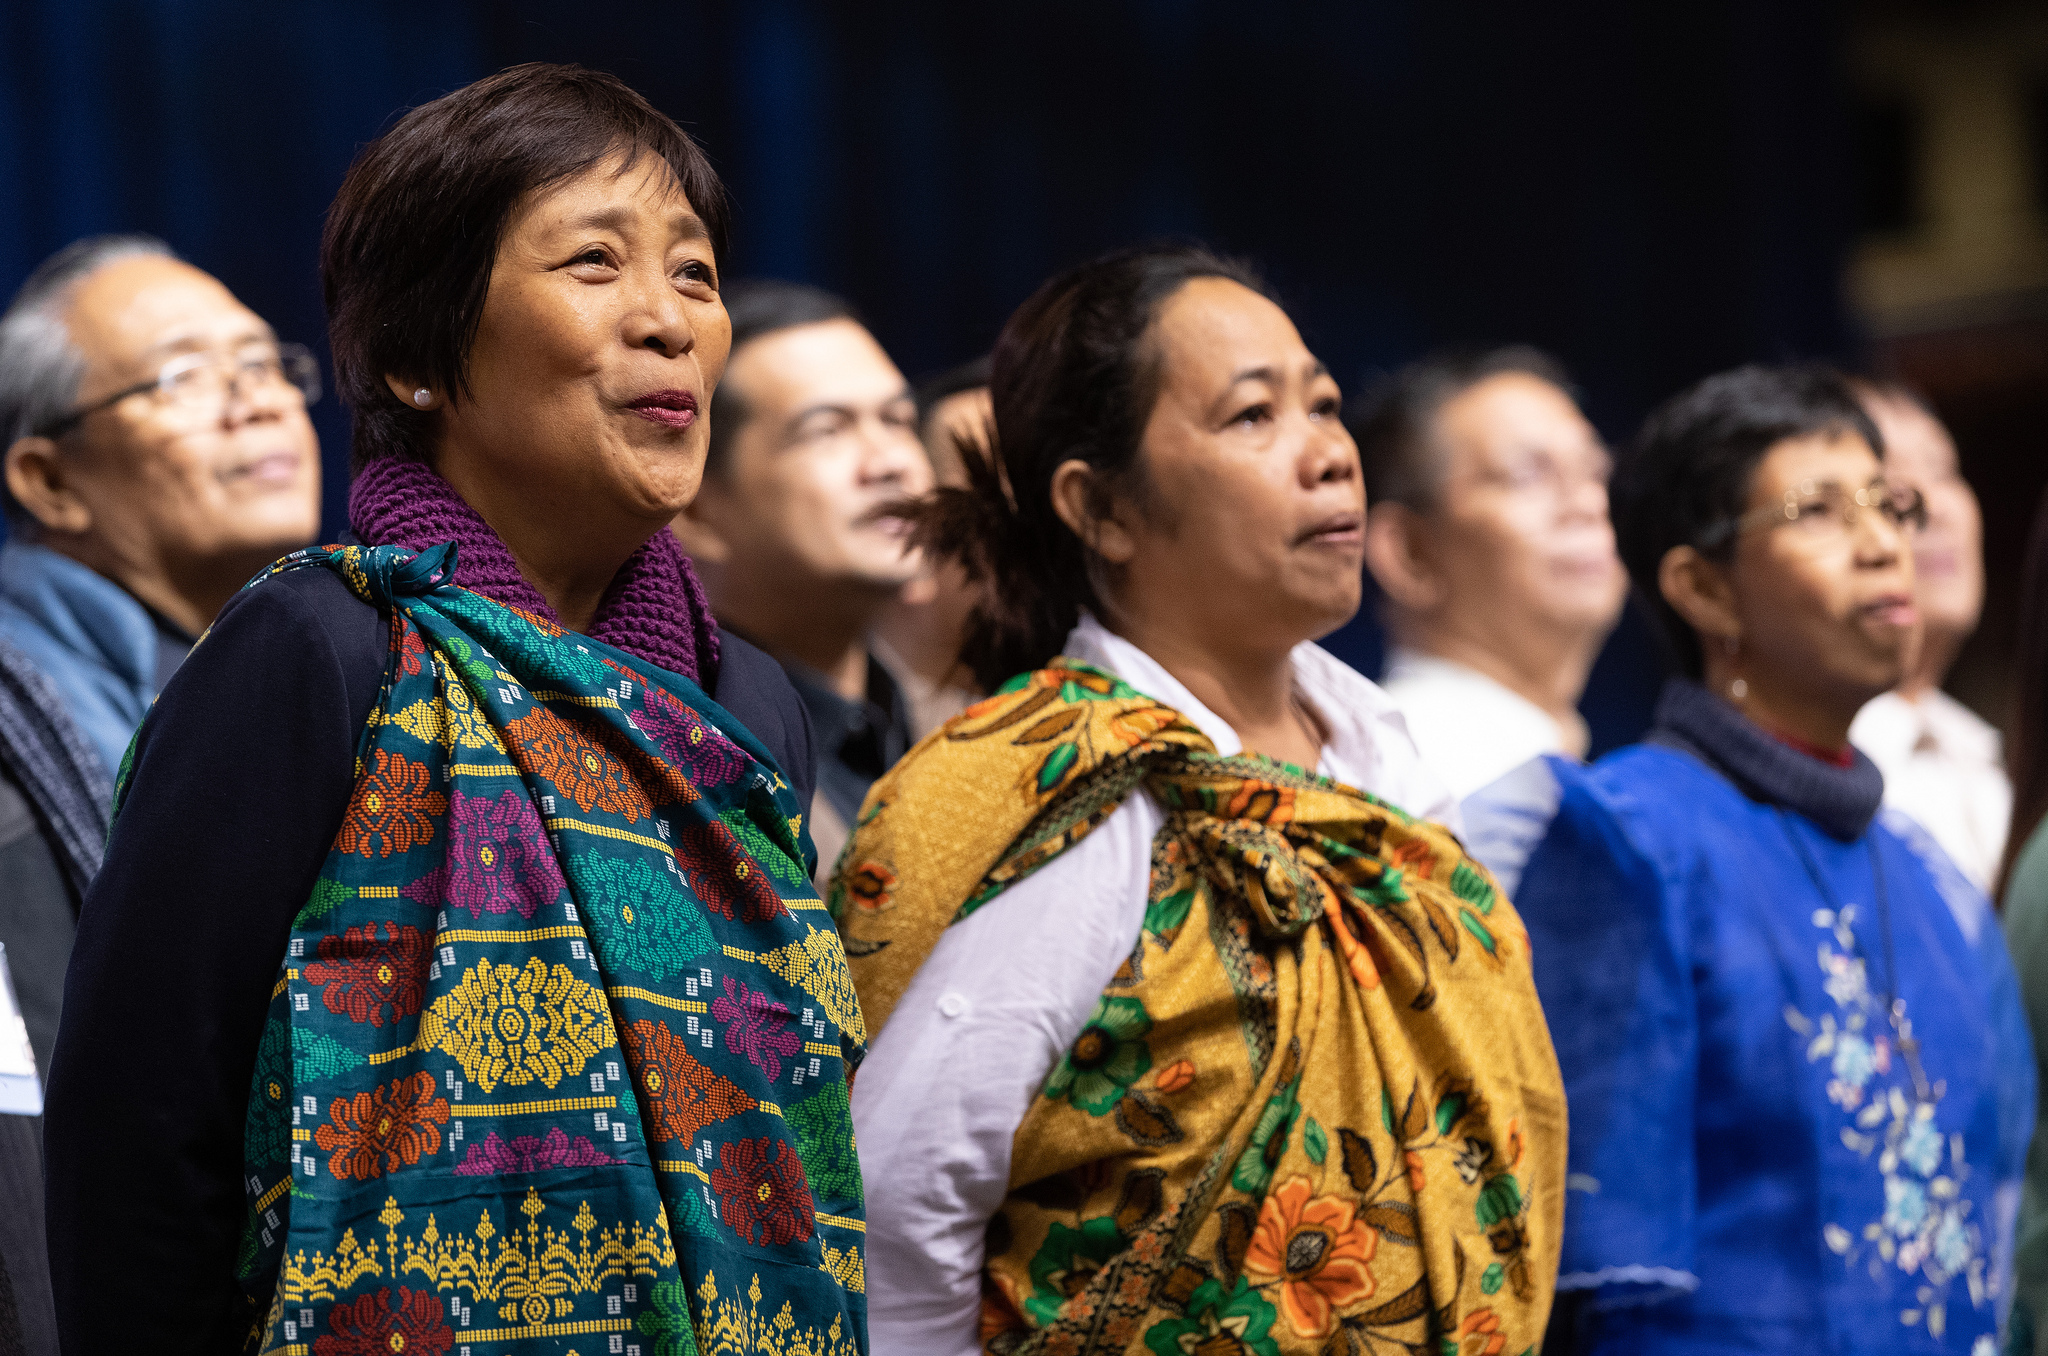 (From left) Julia Stukalova and Yulia Starodubets (Eastern Russia-Central Asia Provisional), and Marina Yugay (Northwest Russia Provisional) sing during the Feb. 23 morning of prayer at the 2019 Special Session of the United Methodist General Conference in St. Louis. Photo by Kathleen Barry, UMNS.